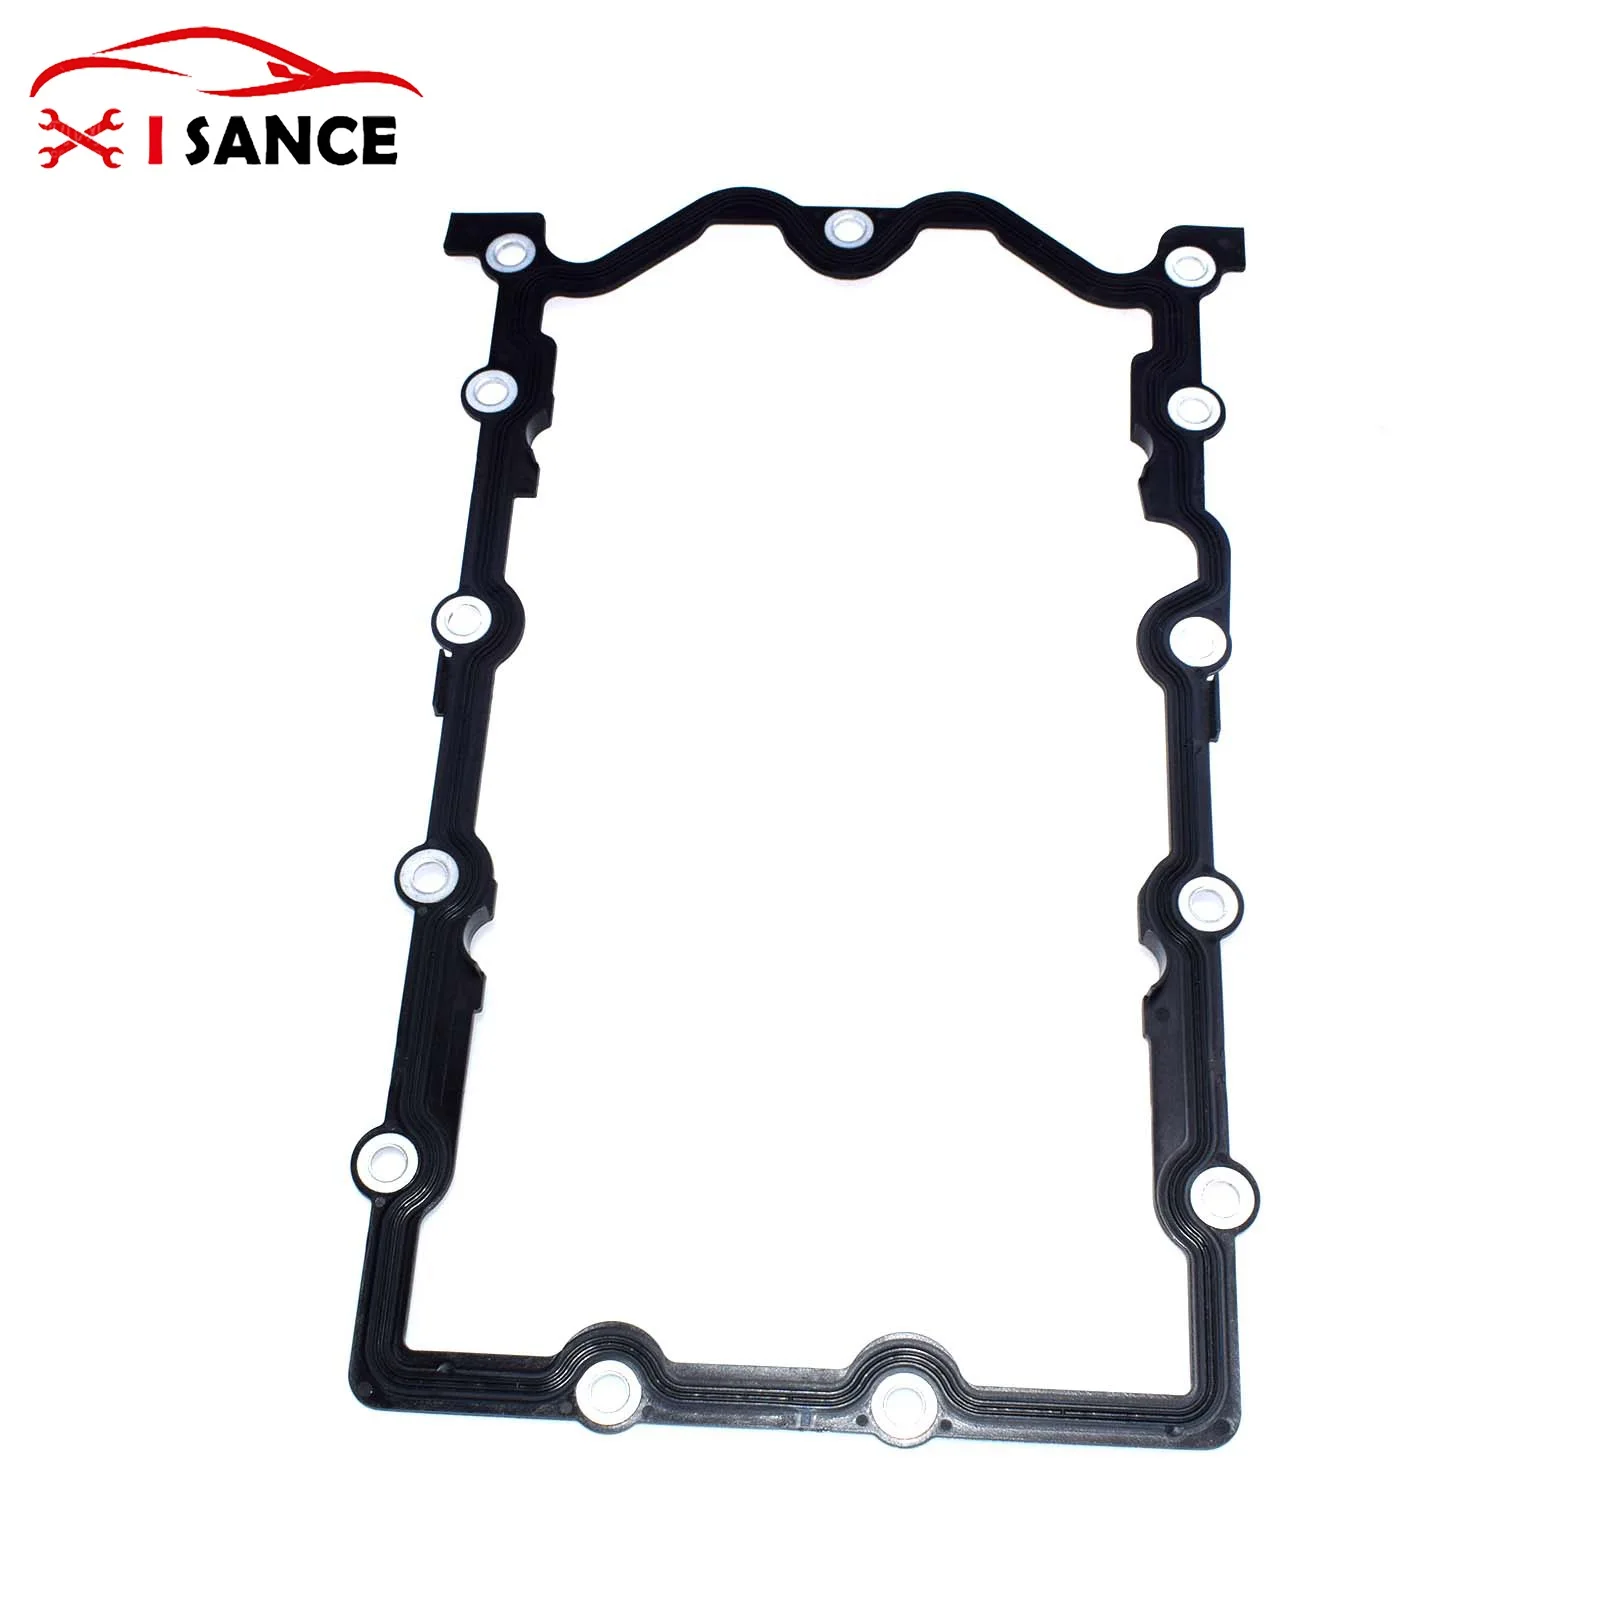 Engine Oil pan with Gasket for Mini Cooper 2002-2008 L4 1.6L 